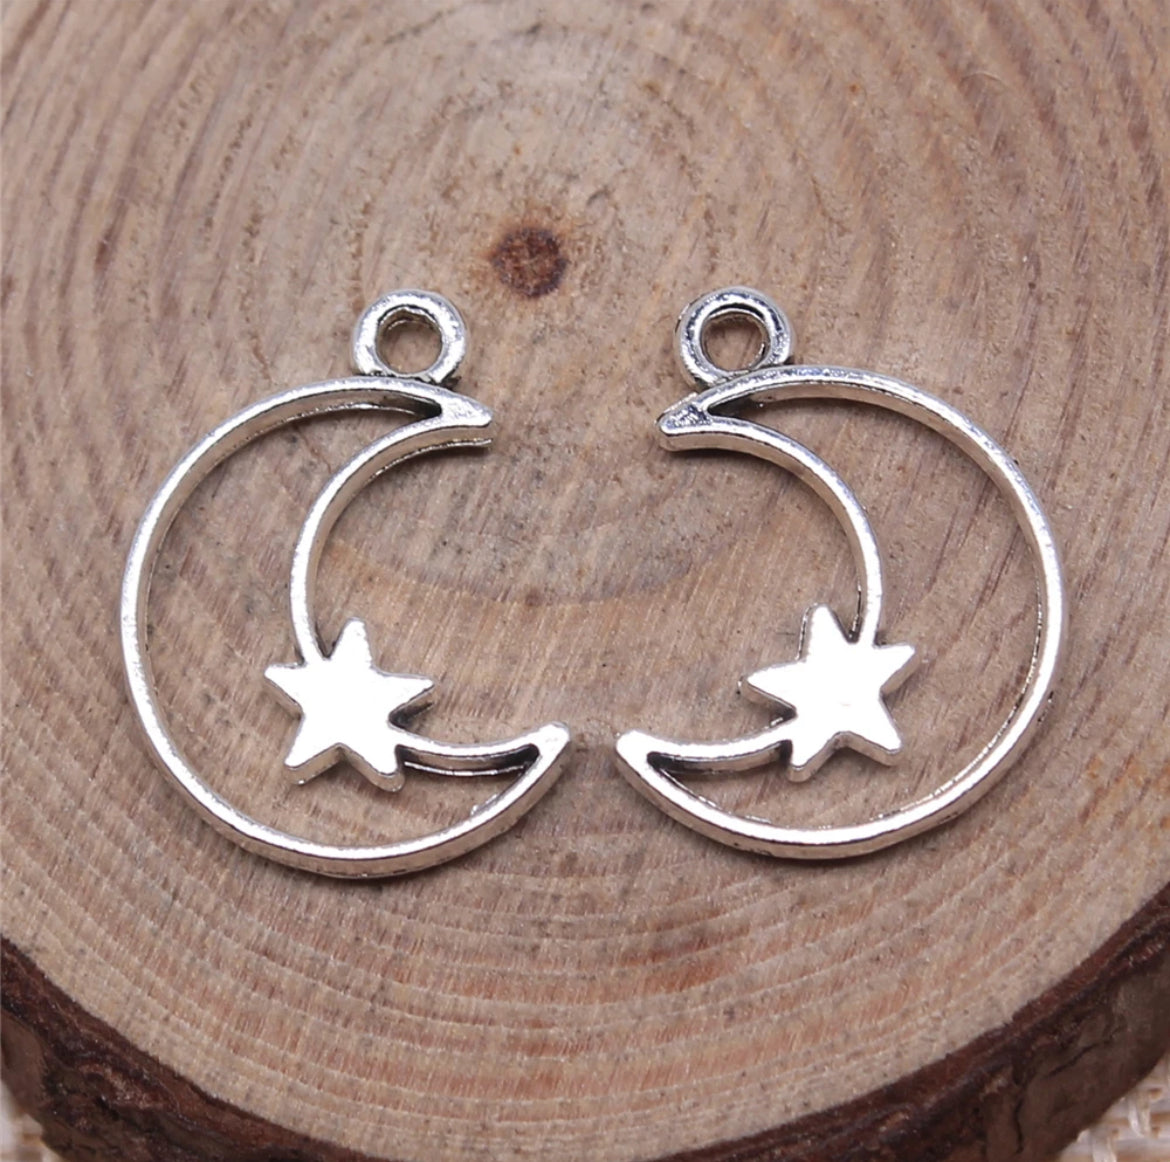 GSC21 - Moon Star (2pc per pack) - ClartStudios - Polymer clay Jewellery